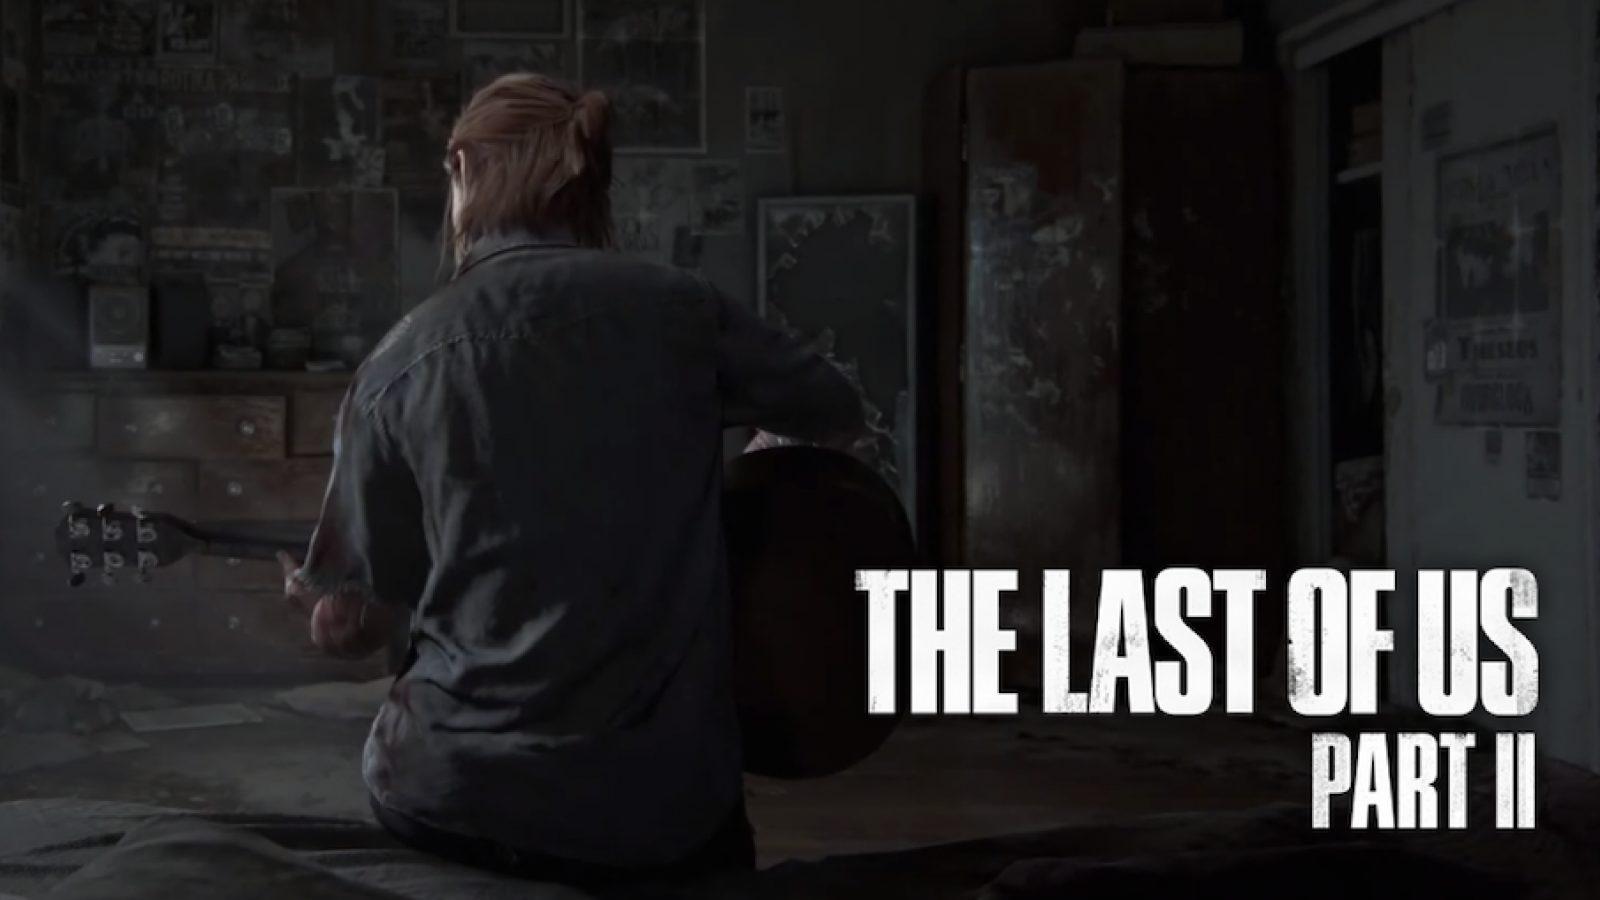 The Last of Us Part II appears set to release in February 2020